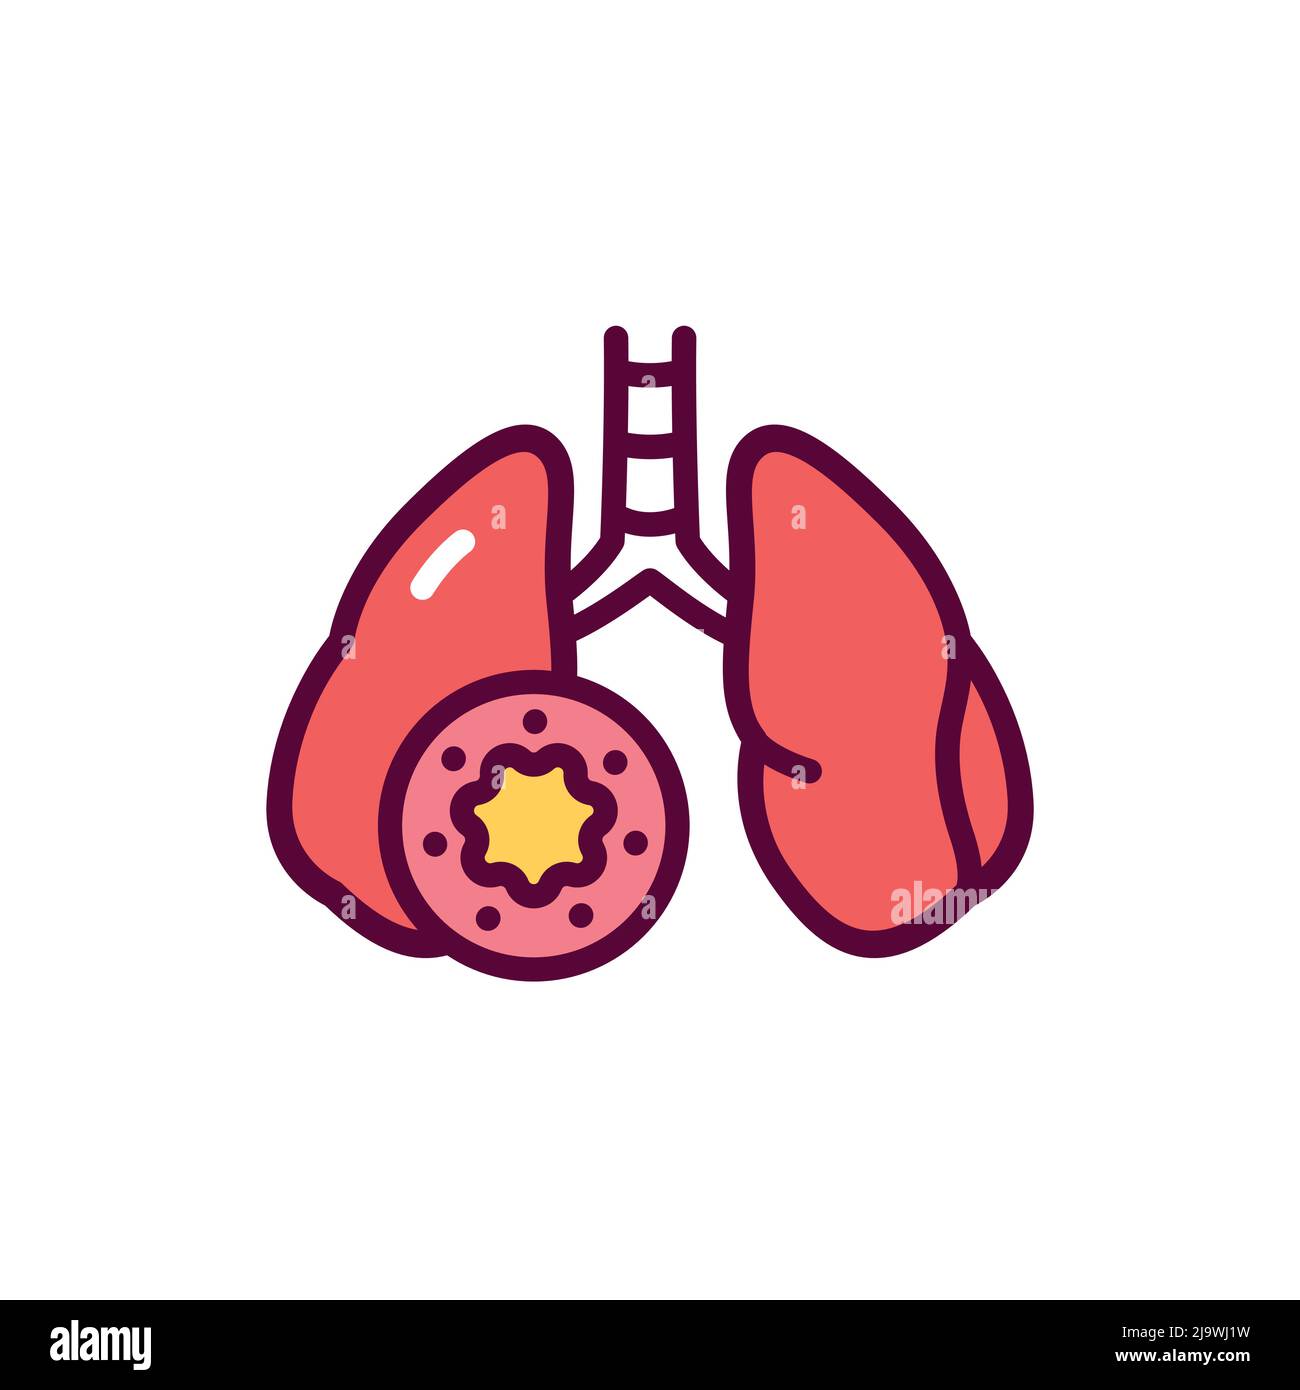 How To Draw Lungs, Step by Step, Drawing Guide, by Dawn - DragoArt